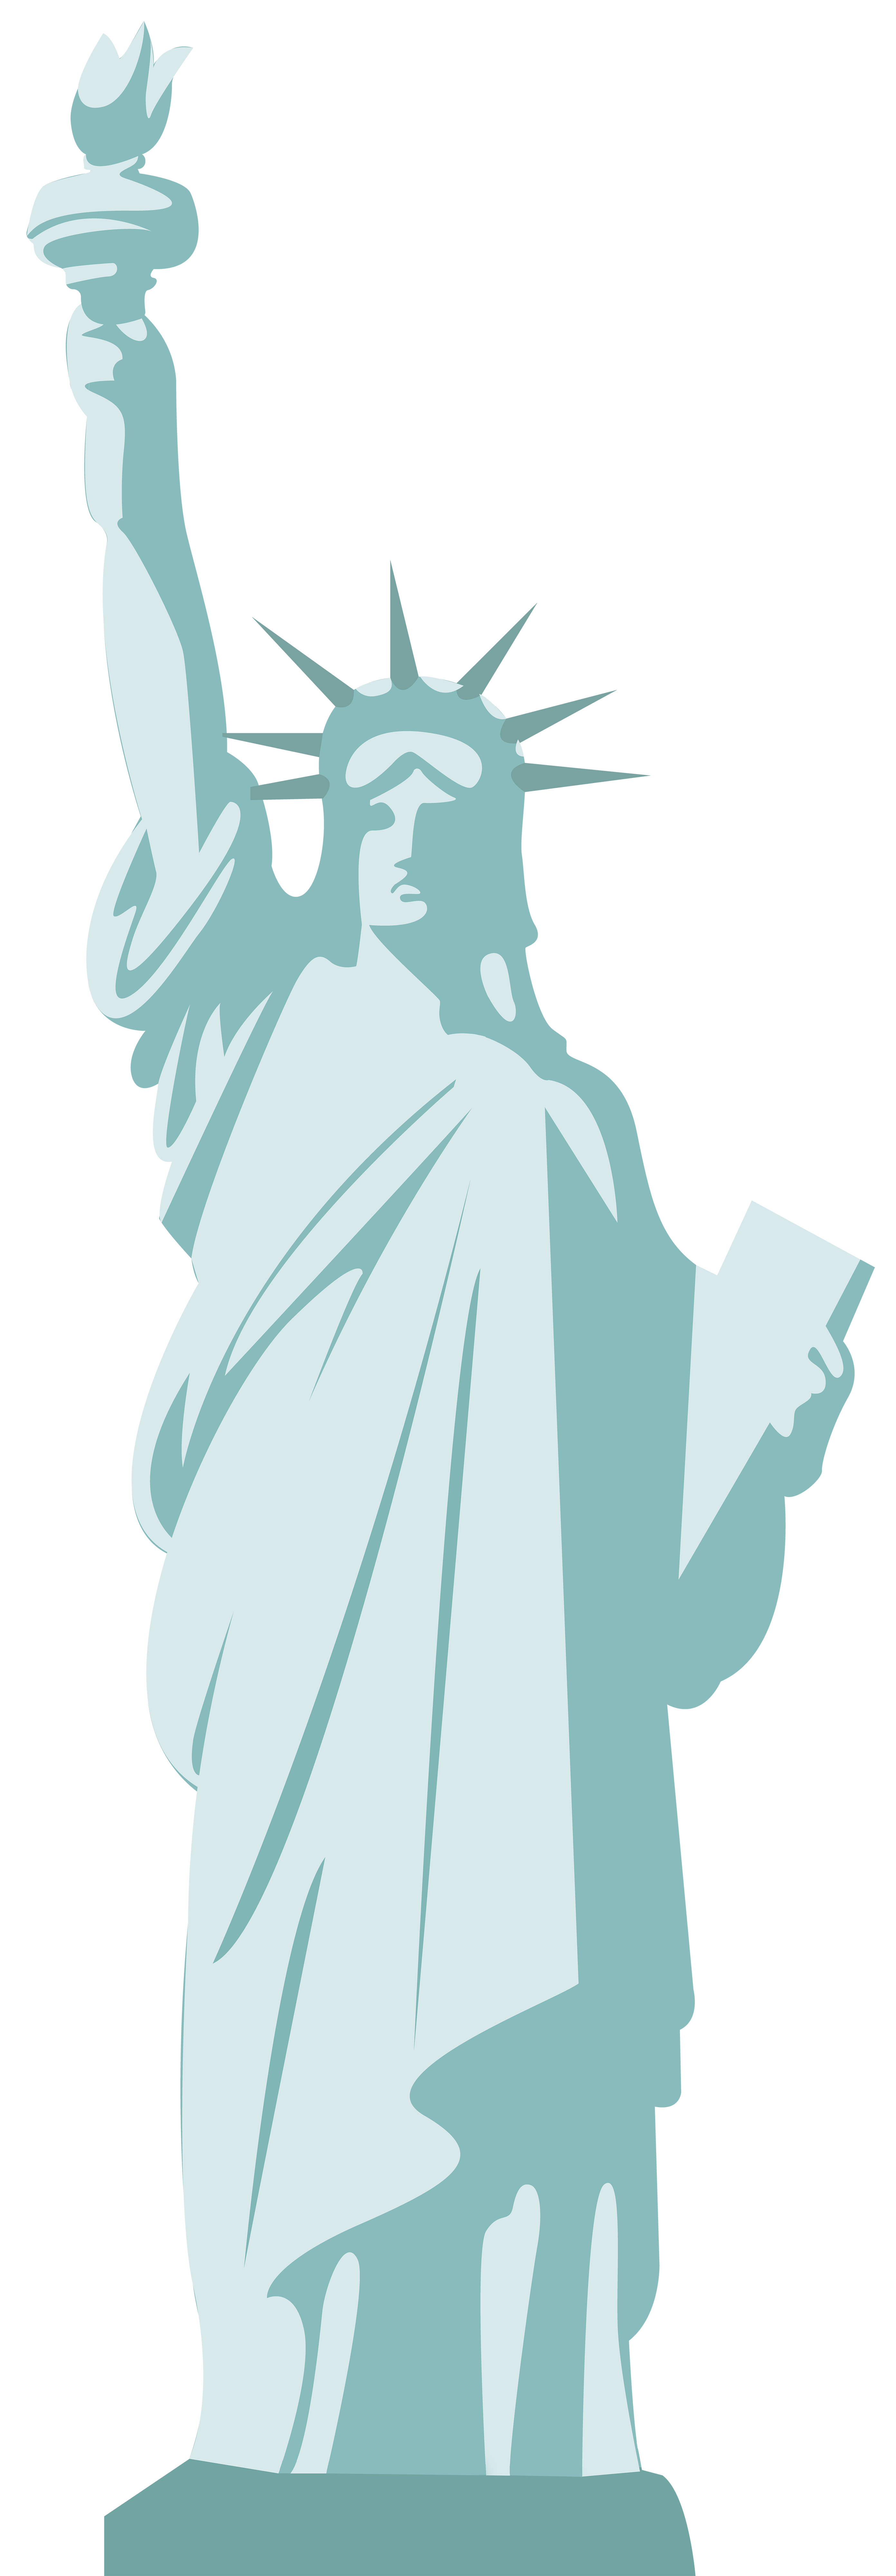 Statue Of Liberty PNG Image | Statue of liberty drawing, Statue of ...